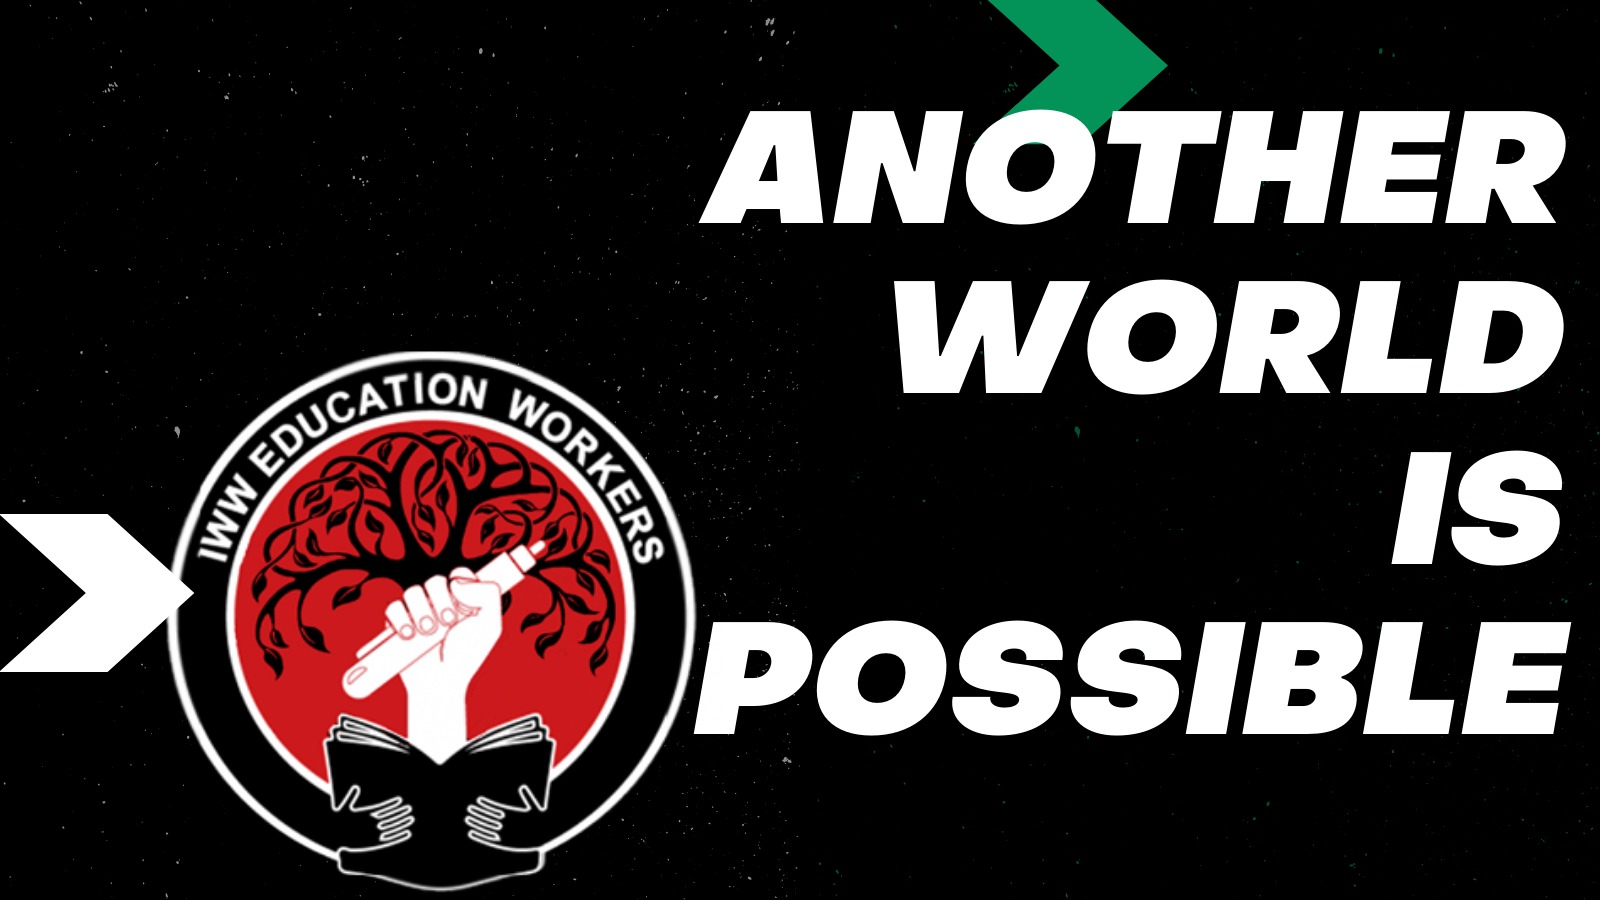 Image reads: "Another World is Possible" and has the logo of the IWW education workers